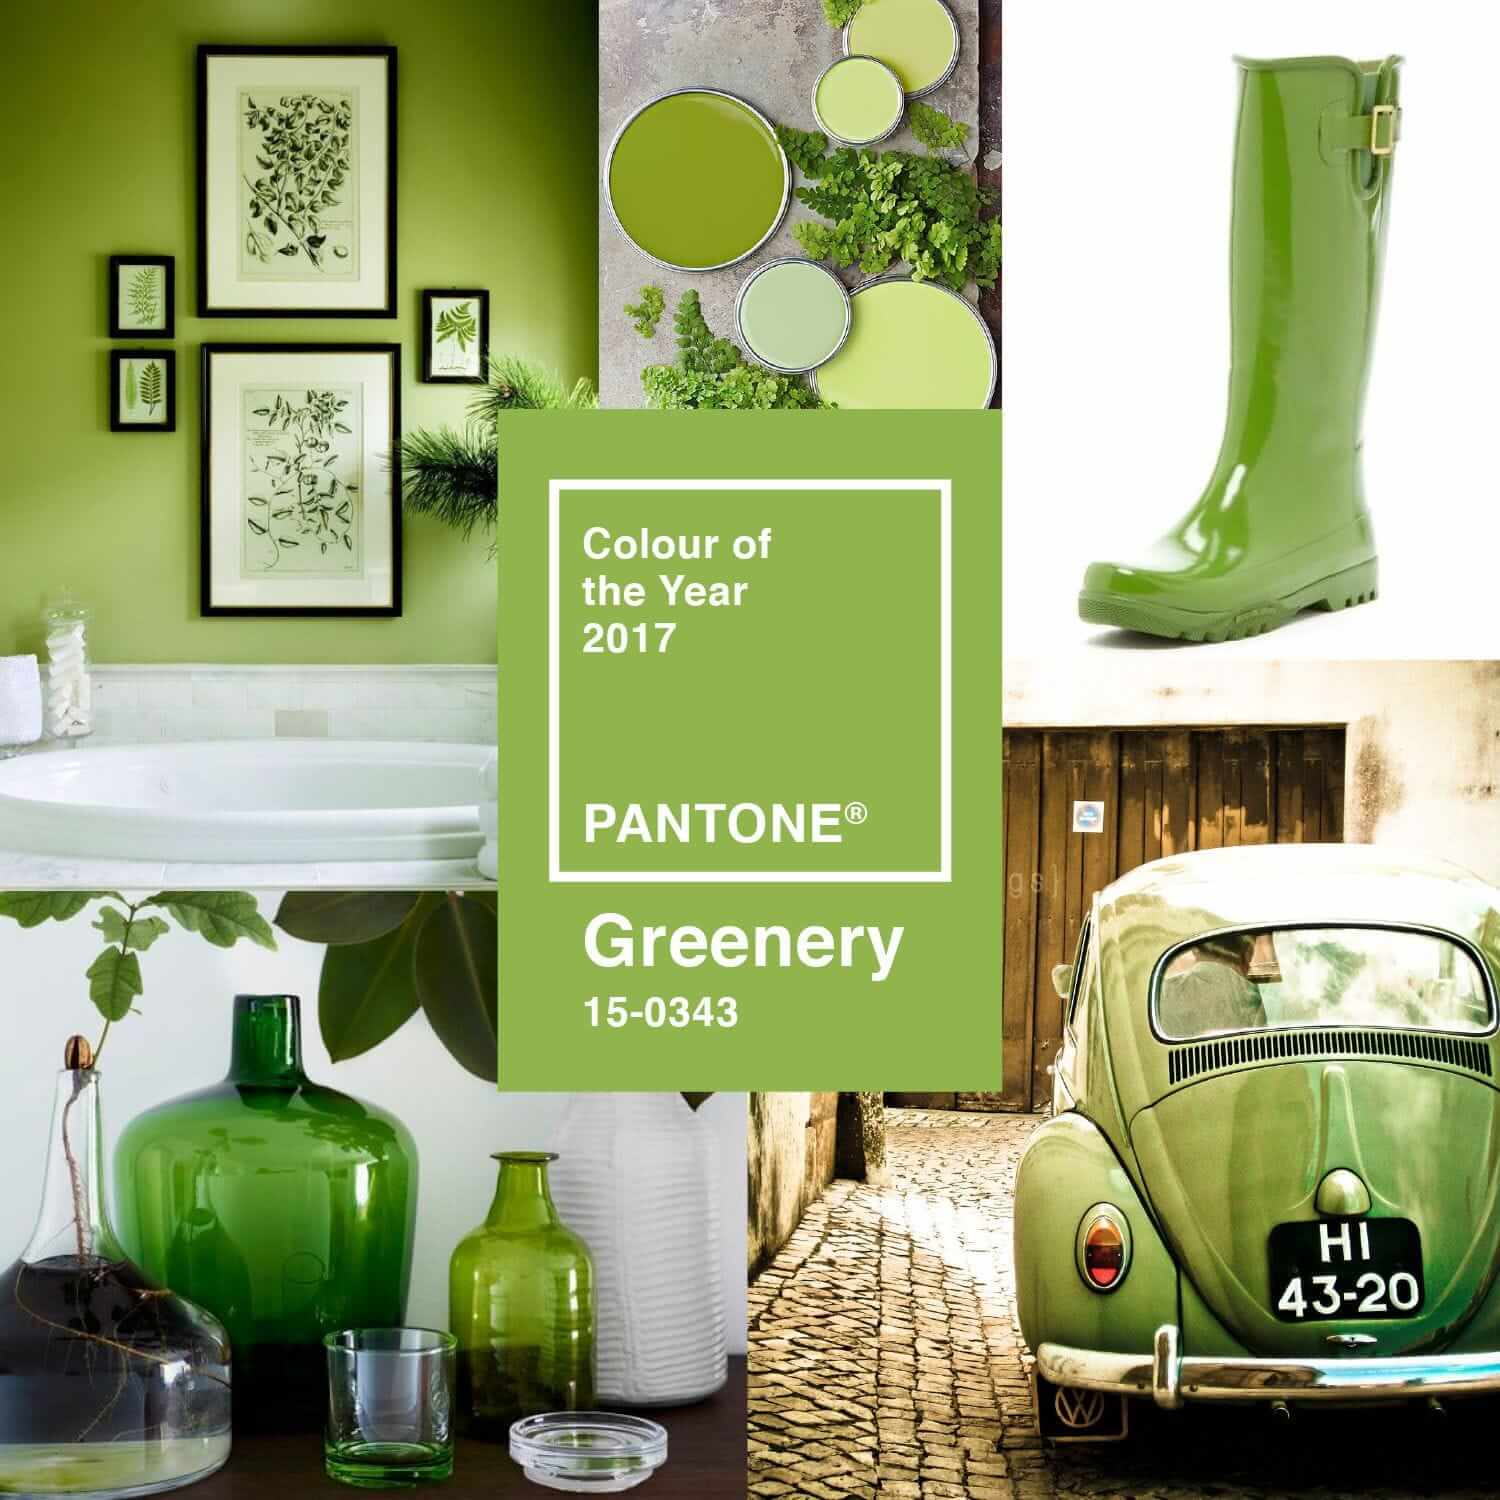 How Does Pantone Select The Color Of The Year?